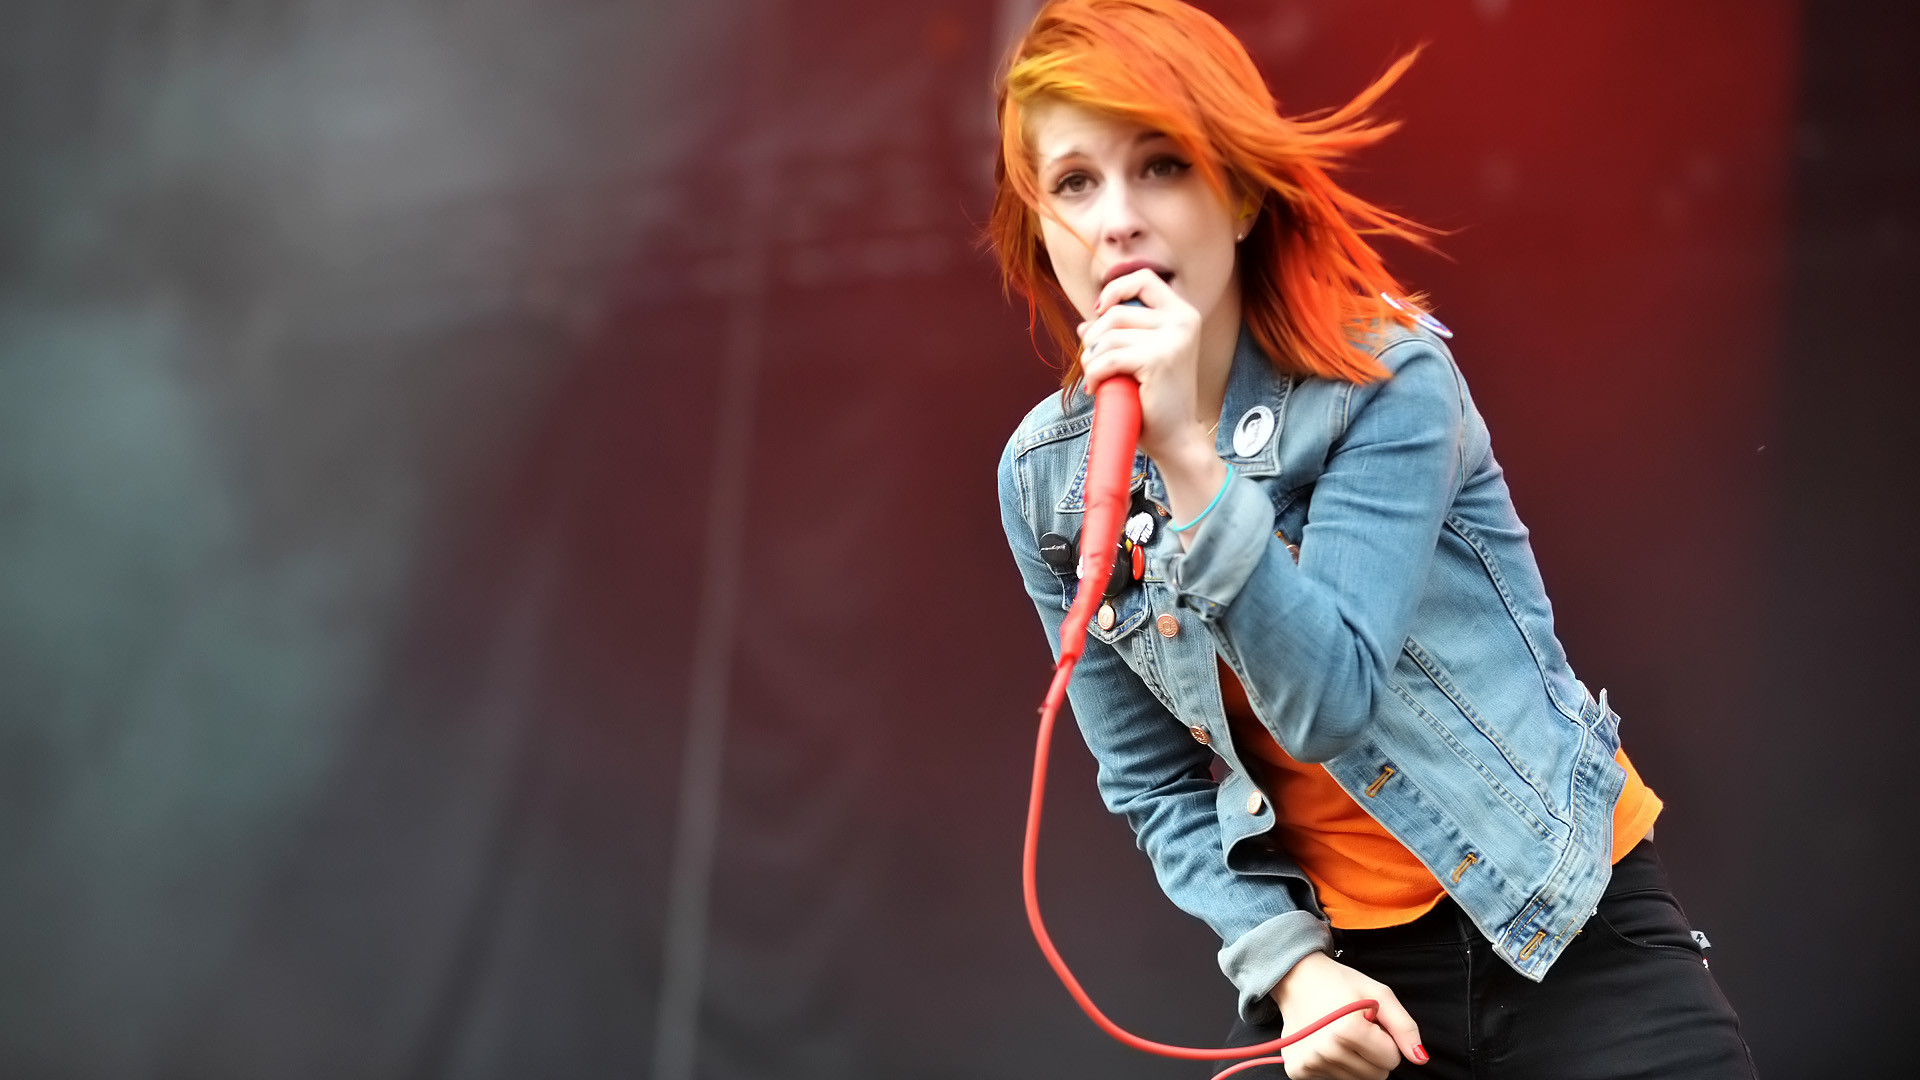 1920x1080 Paramore images hayley williams HD wallpaper and background photos